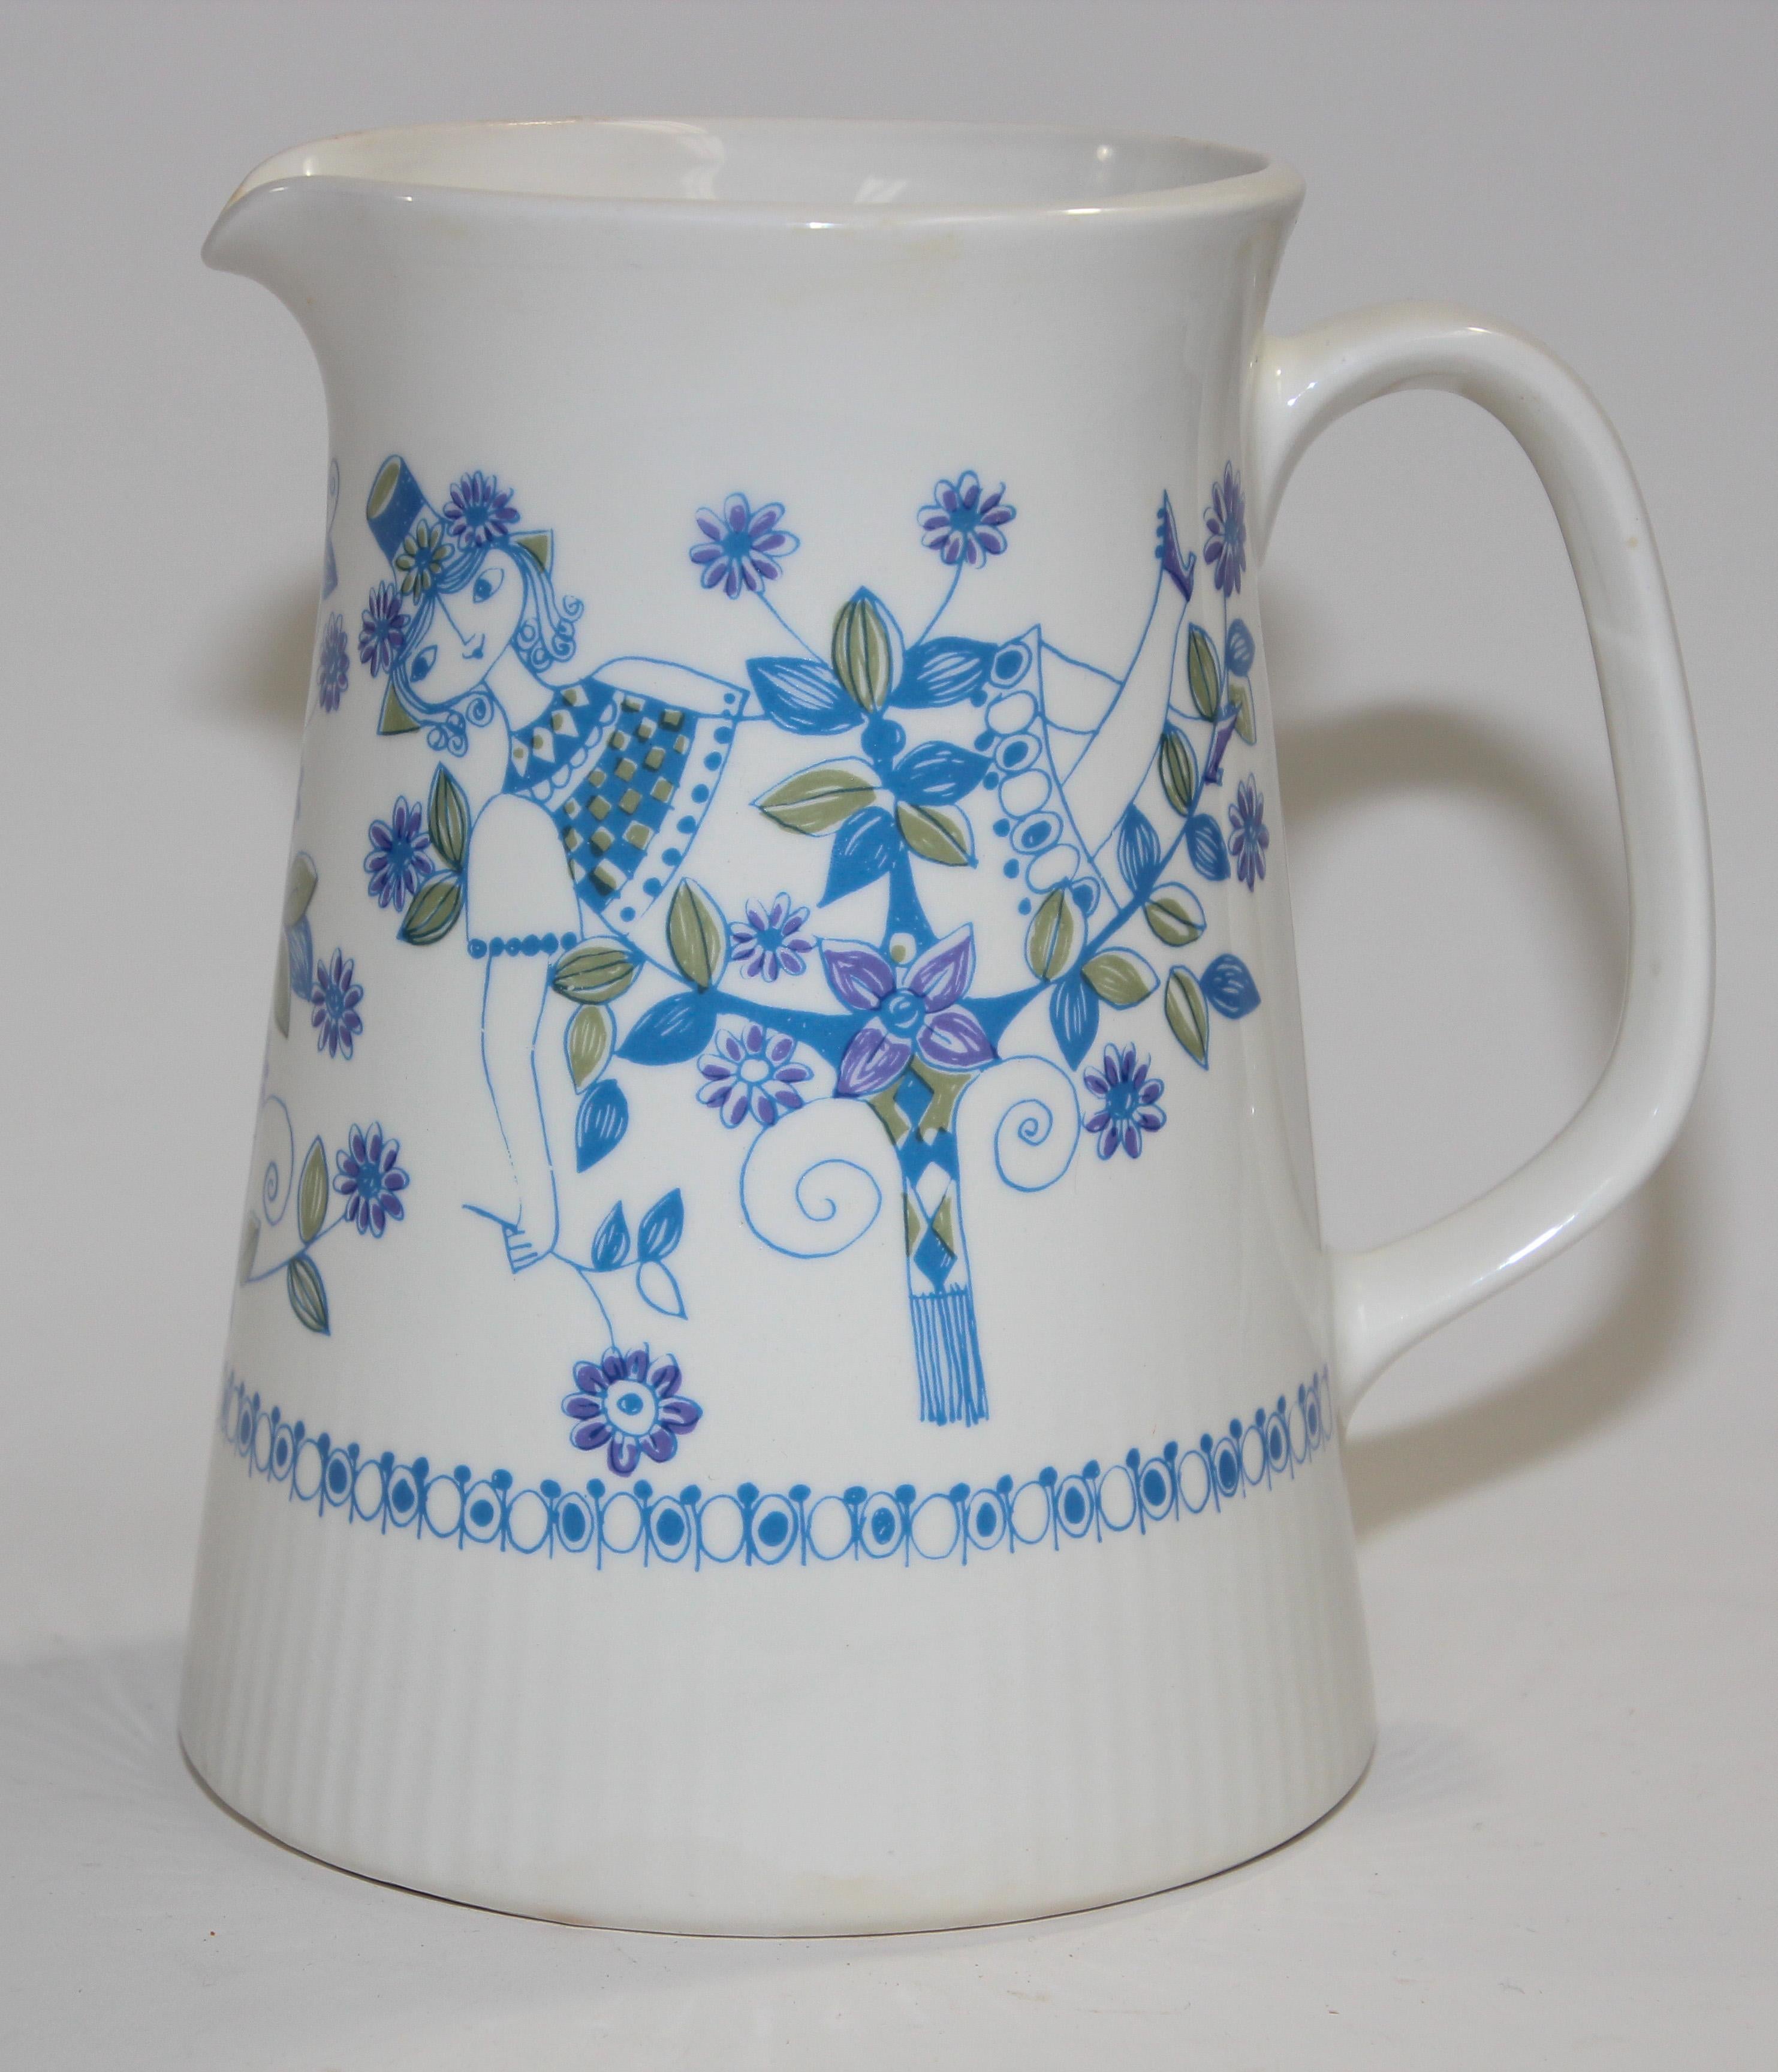 Vintage Turi-Design Lotte Pitcher, Made in Norway 1